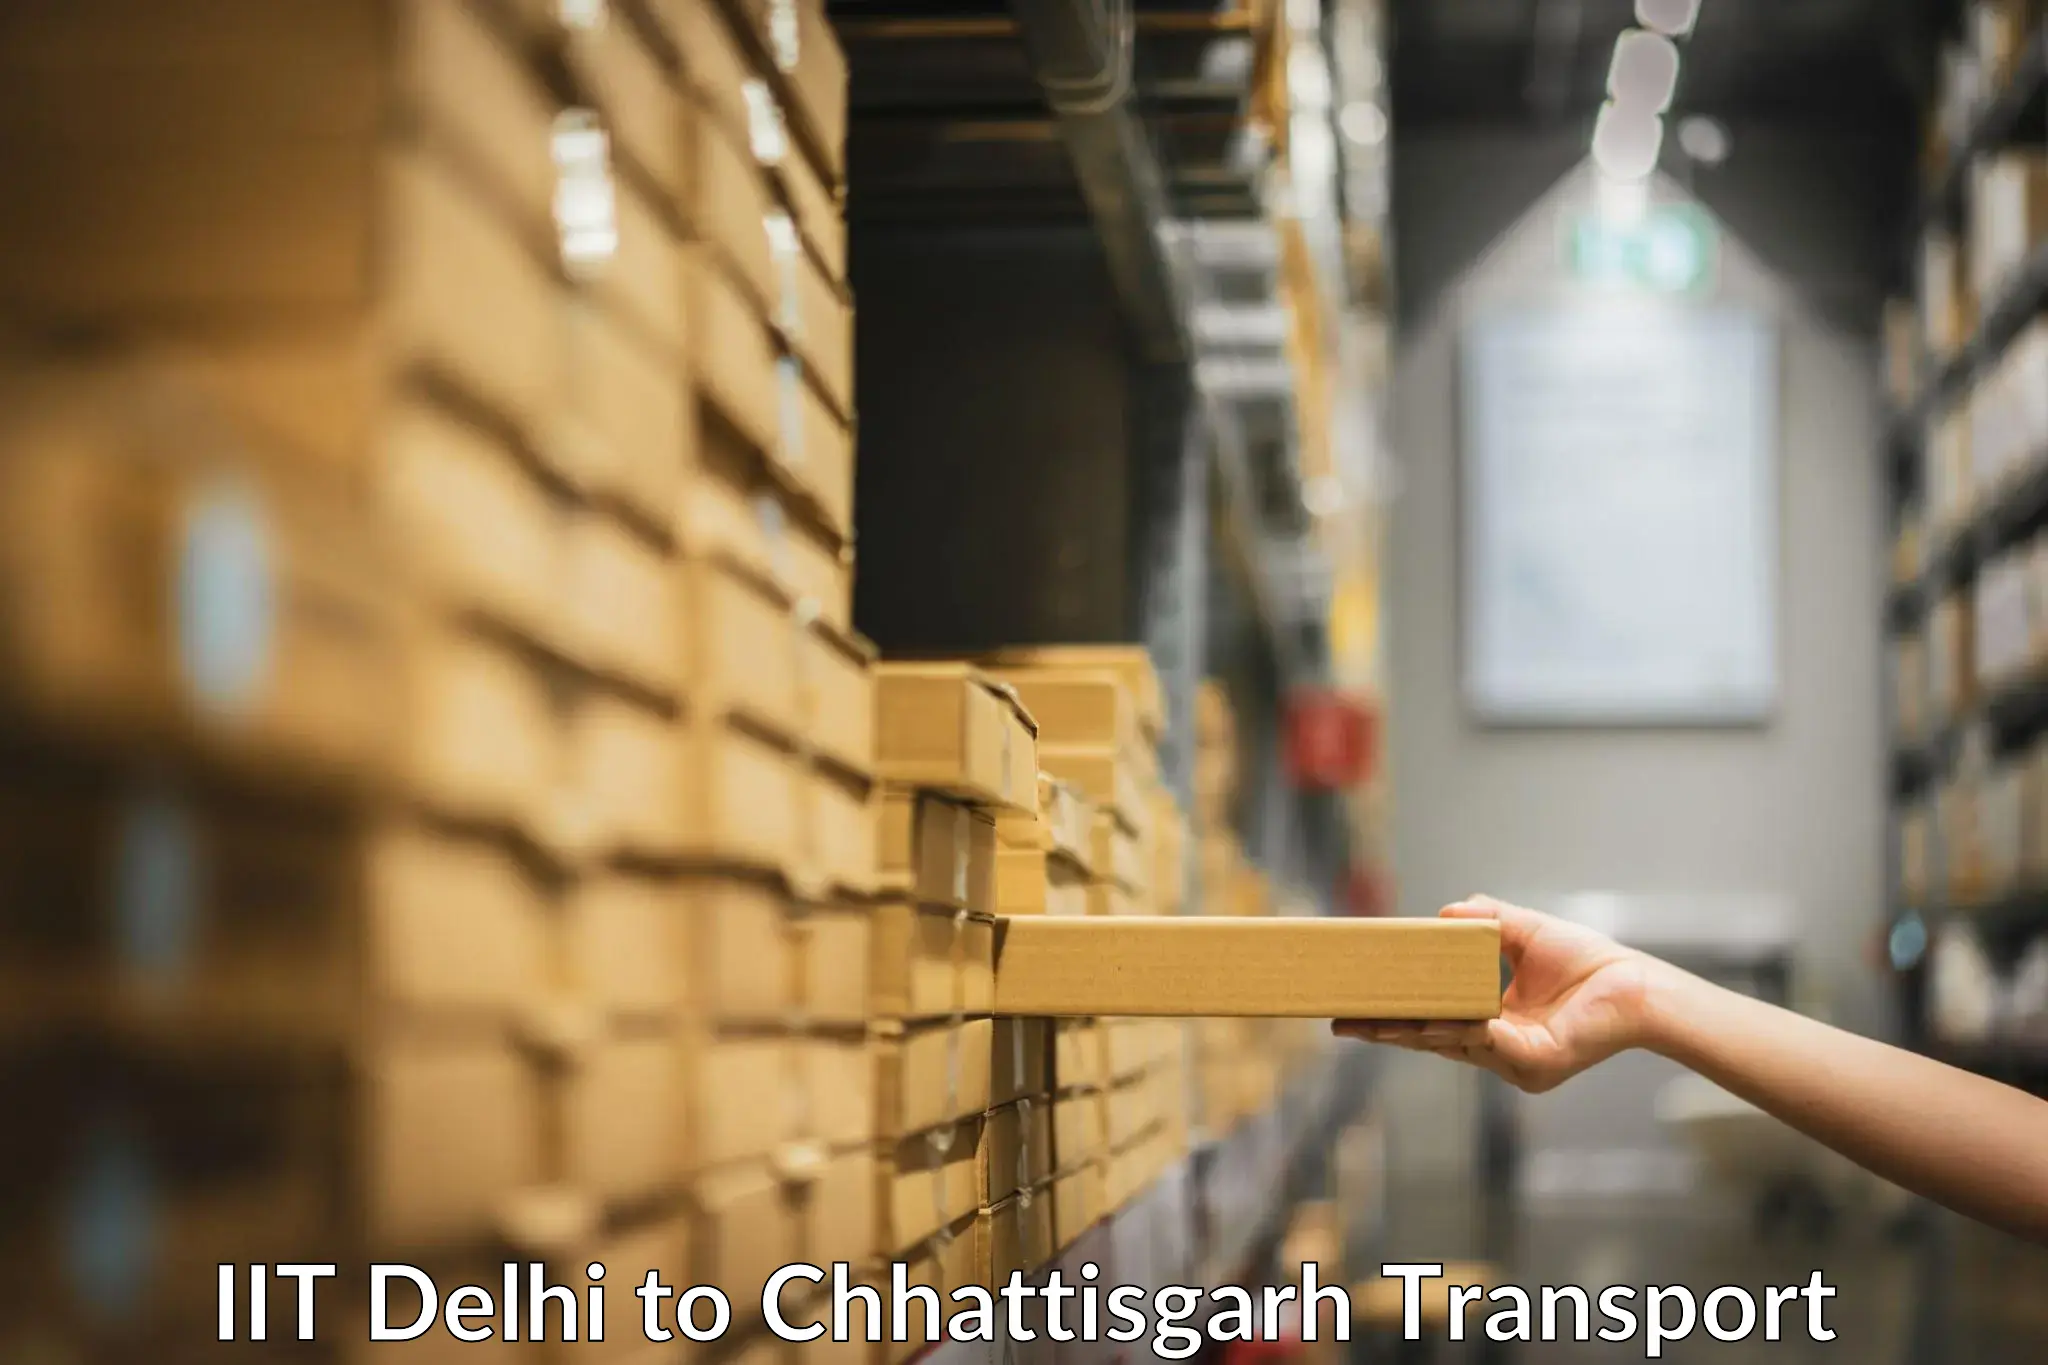 Transport shared services in IIT Delhi to Rajnandgaon